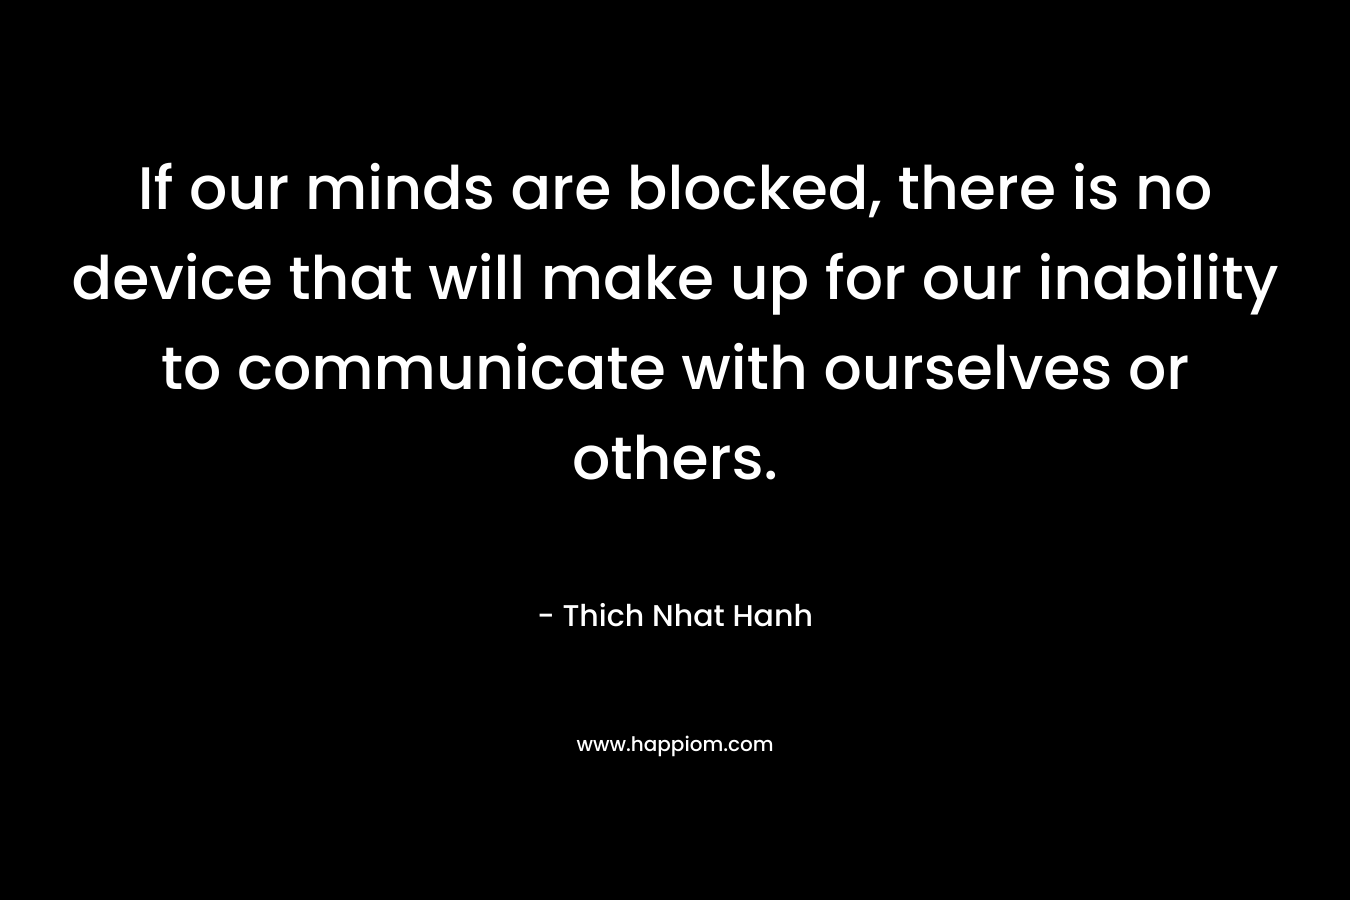 If our minds are blocked, there is no device that will make up for our inability to communicate with ourselves or others.